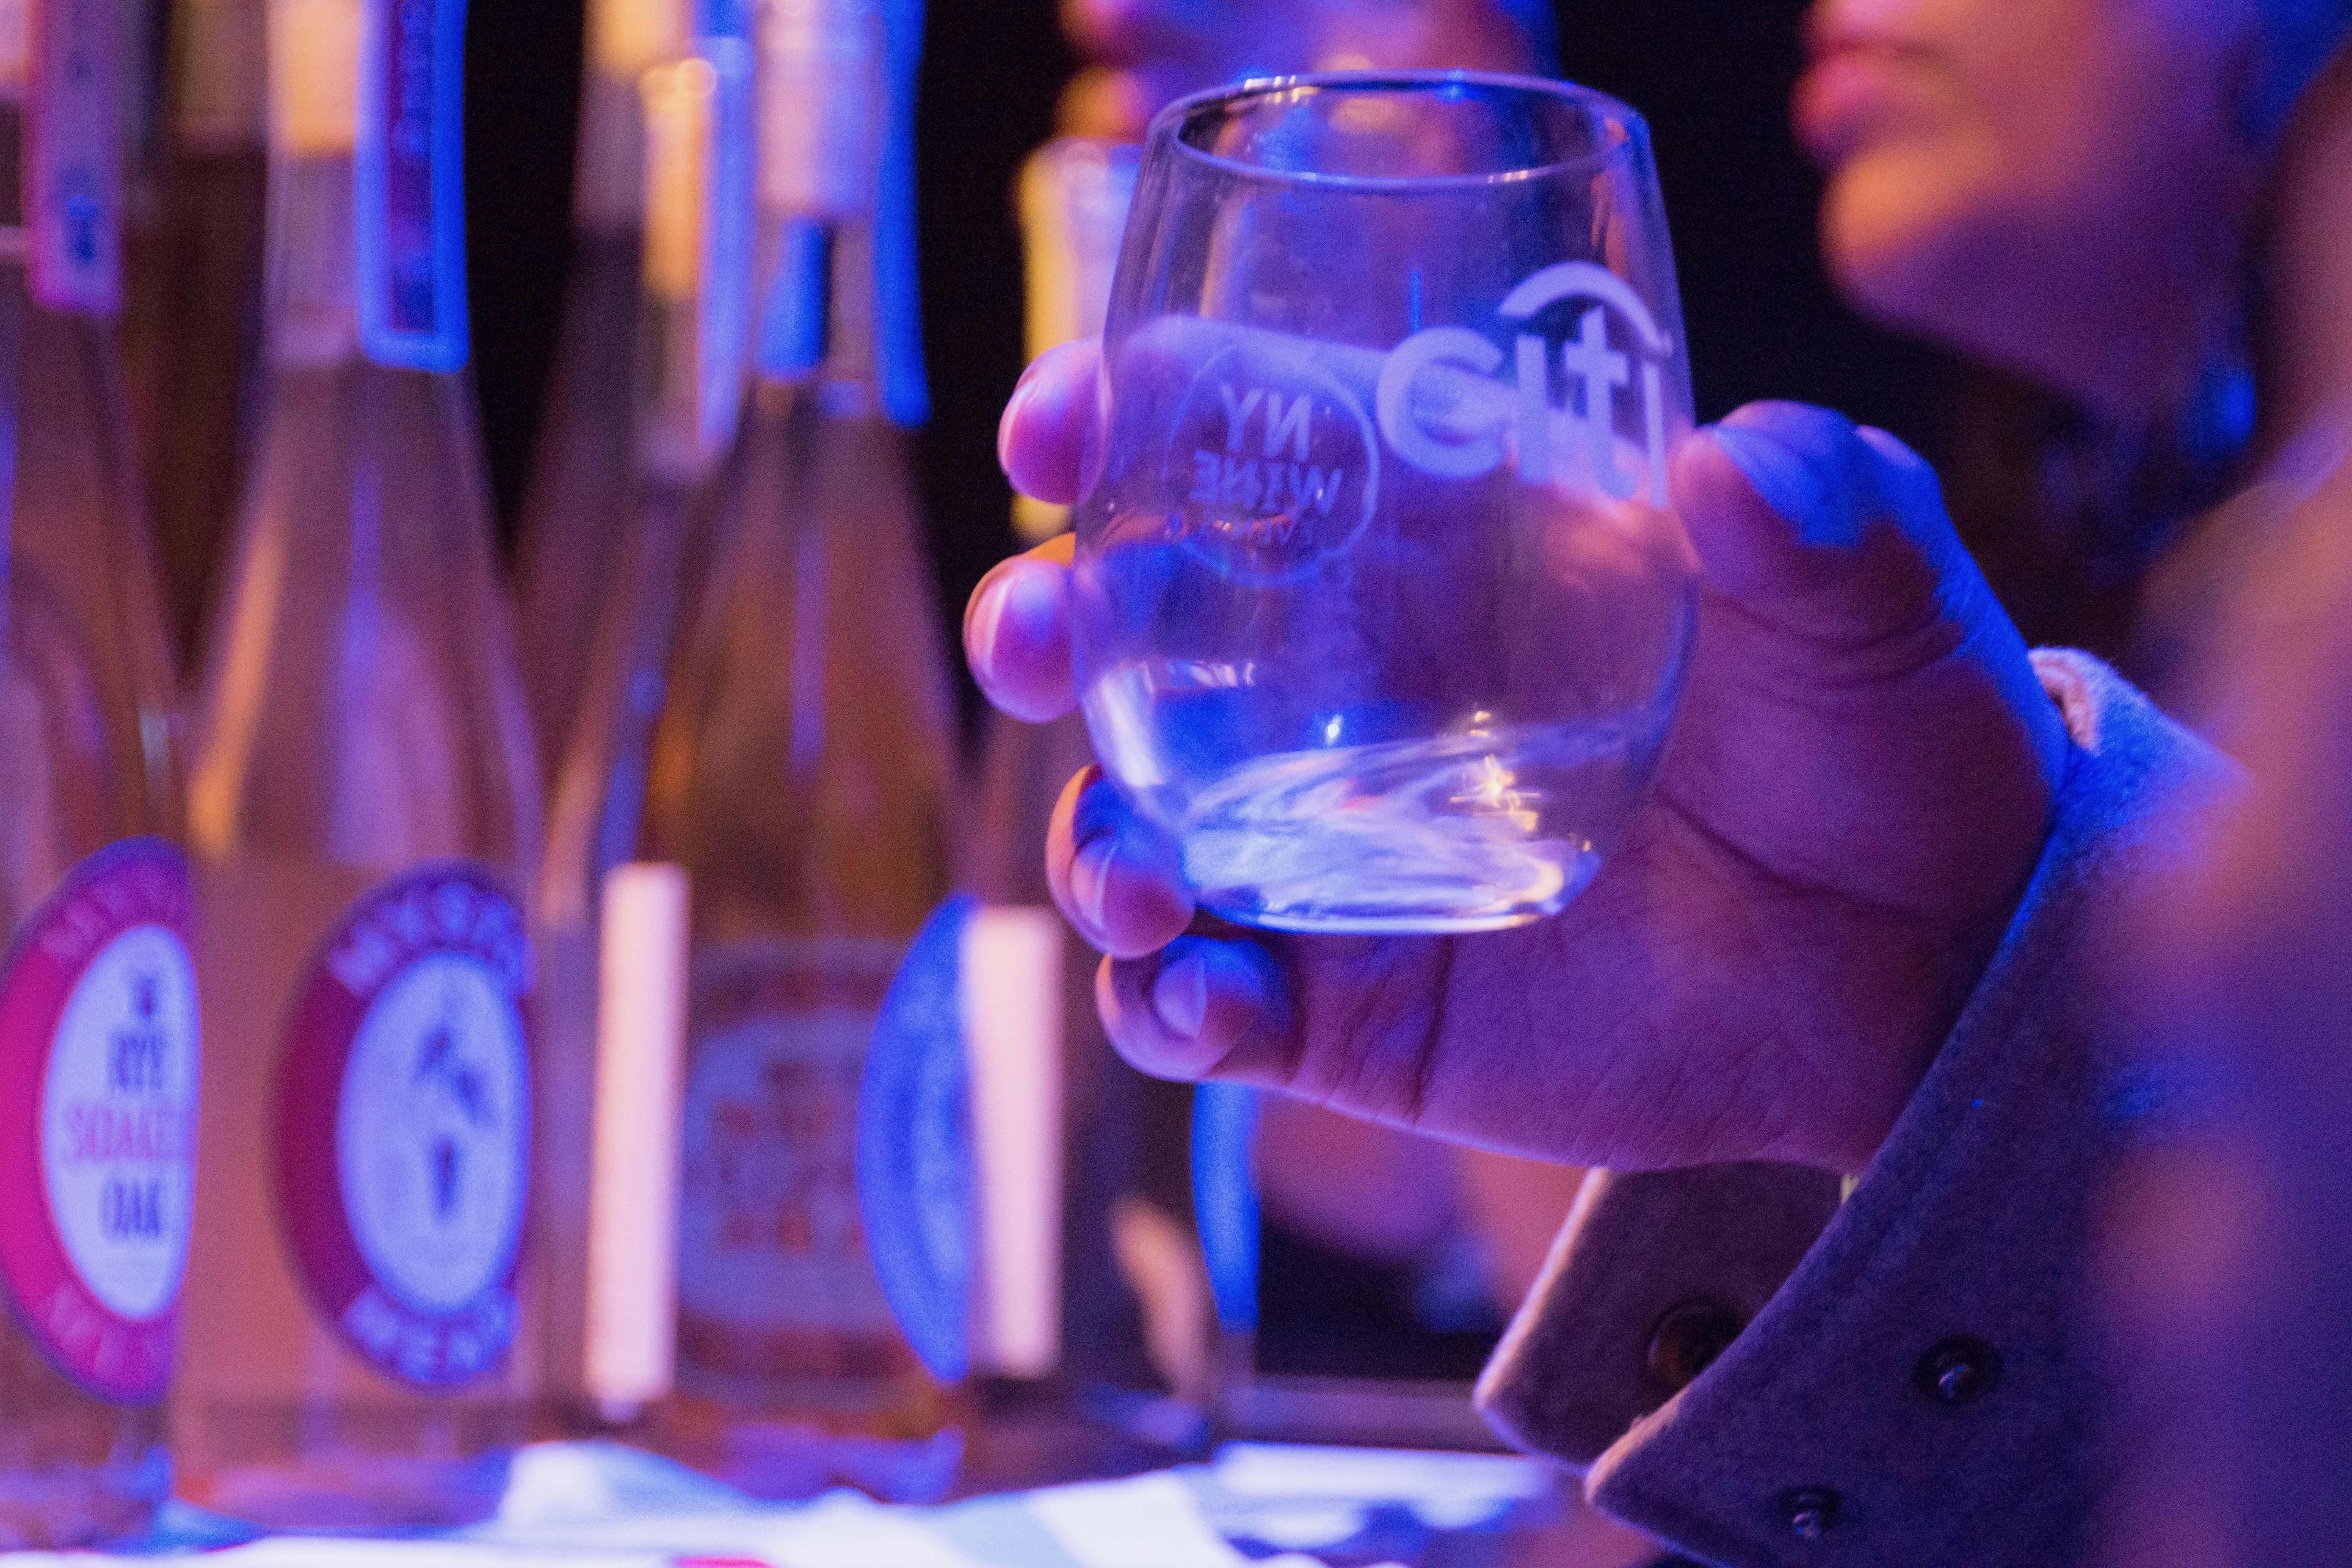 The NYC Winter Wine Festival presented by Citi takes place at the expansive PlayStation Theater, Sat. March 10. Tickets & Info: NewYorkWineEvents.com.